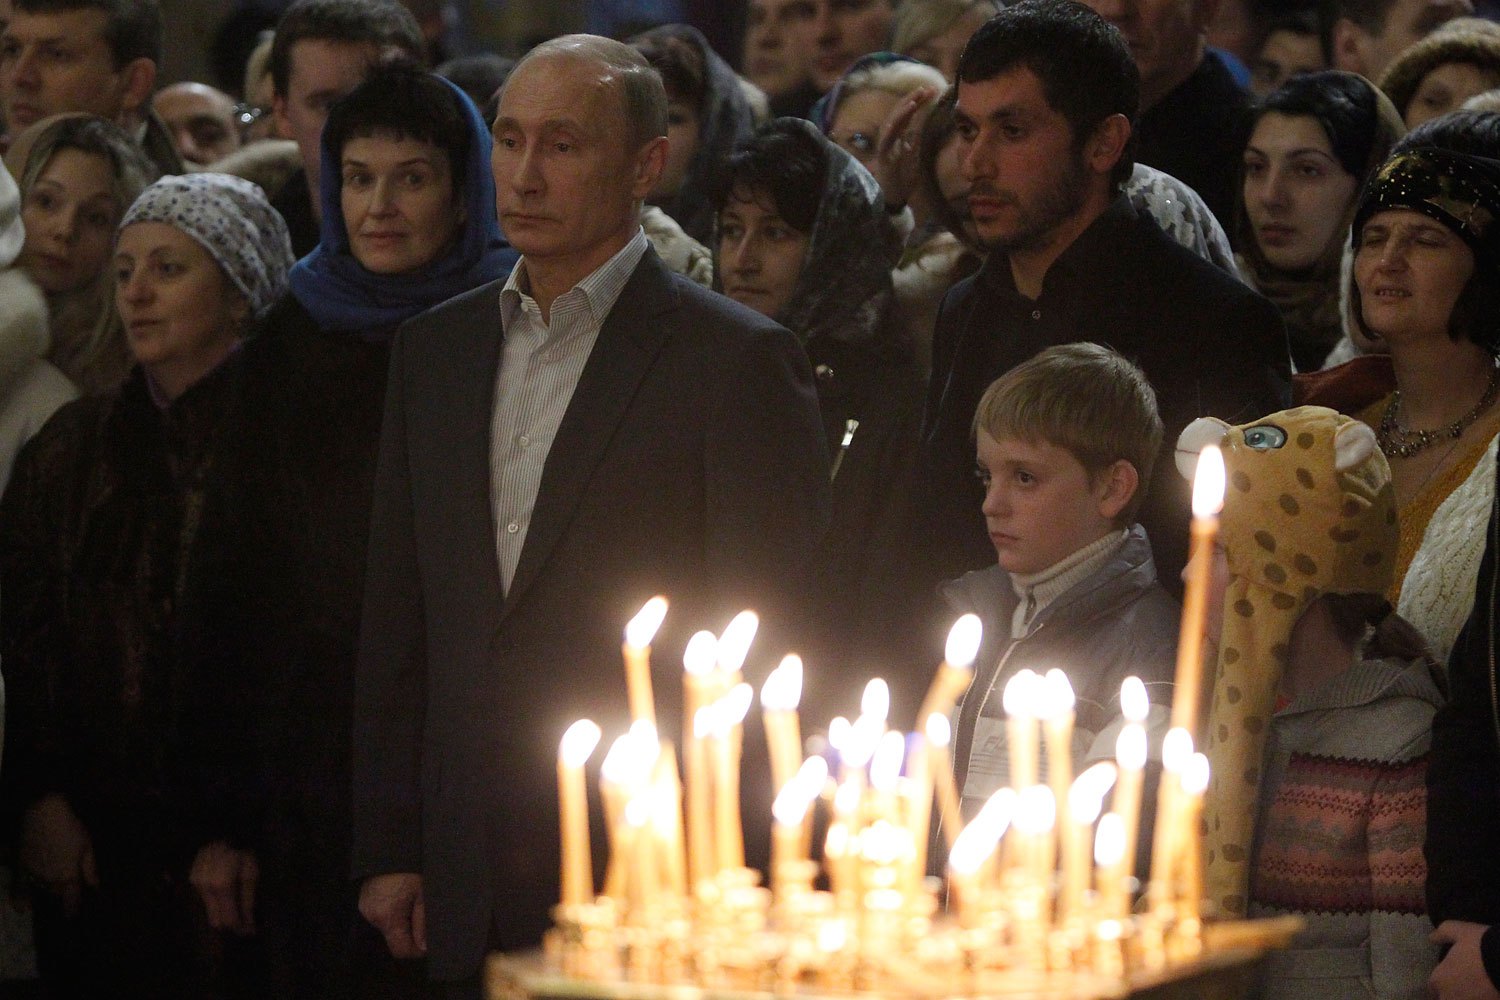 Russia's President Vladimir Putin attends the Orthodox Christmas service at the Cathedral of the Holy Face of Christ the Savior in the Russian city of Sochi on Jan. 7, 2014.